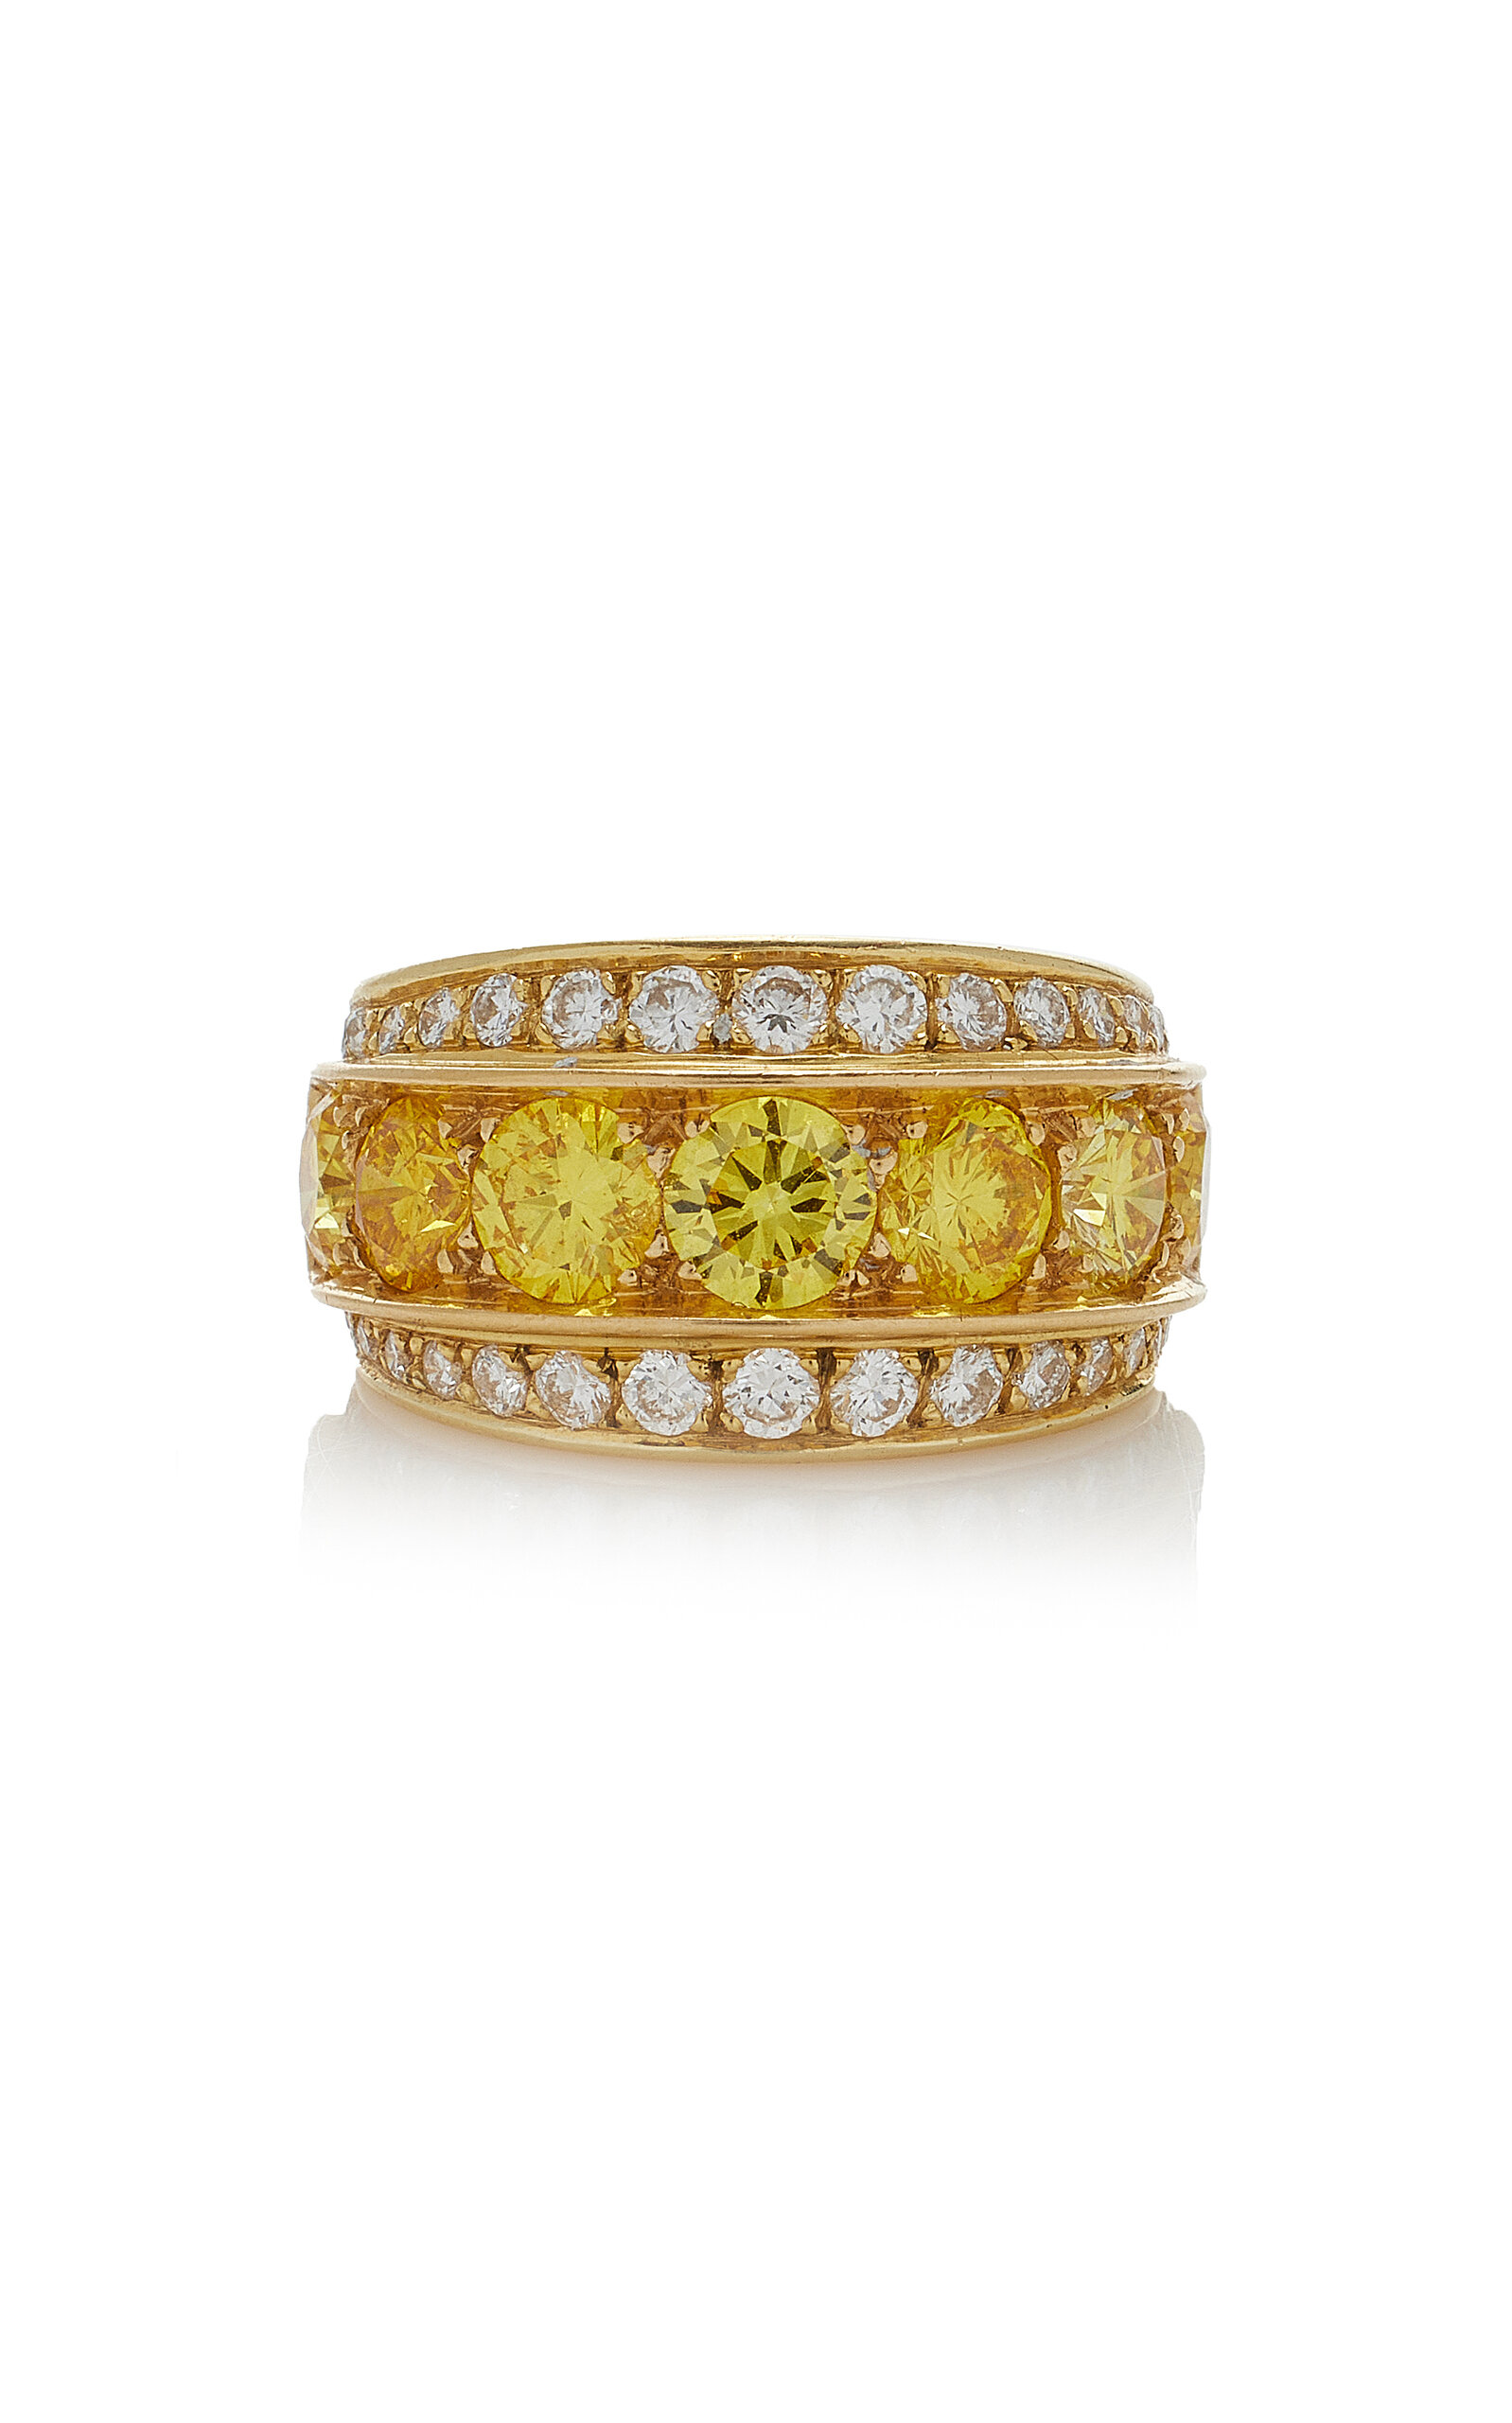 Simon Teakle Fancy Colored Diamond Band Ring; By Van Cleef & Arpels In Yellow